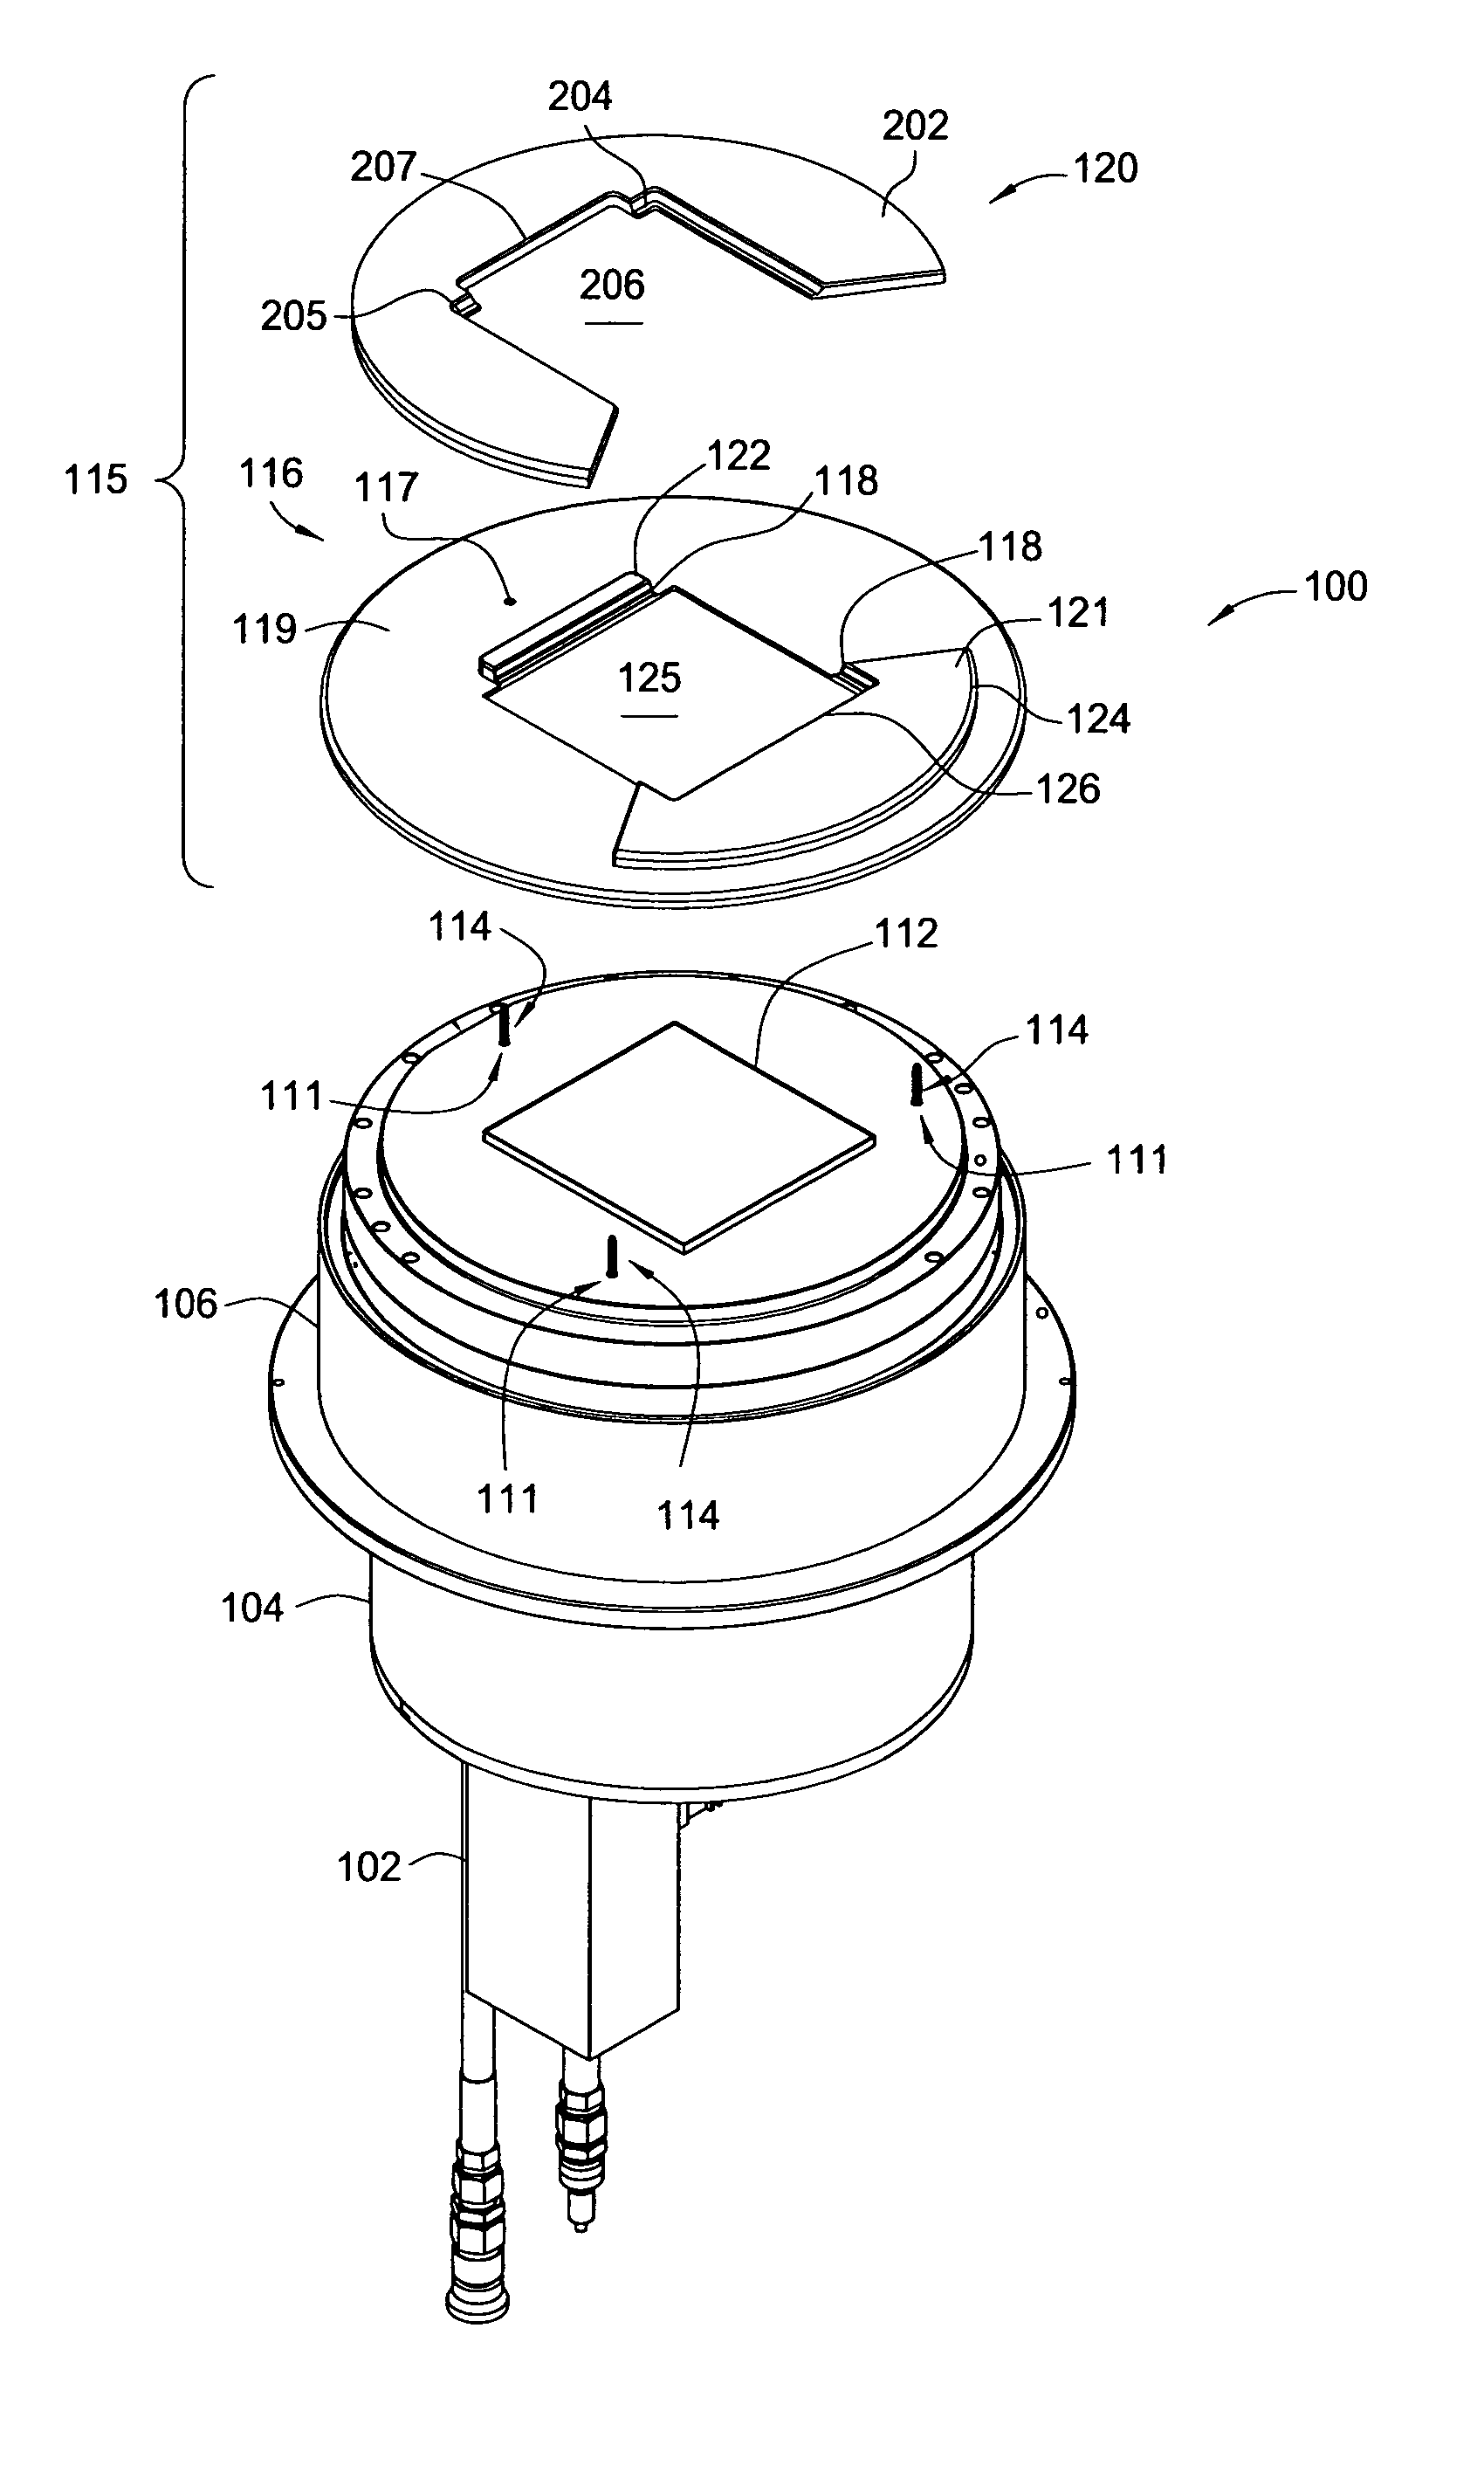 Mask etch processing apparatus